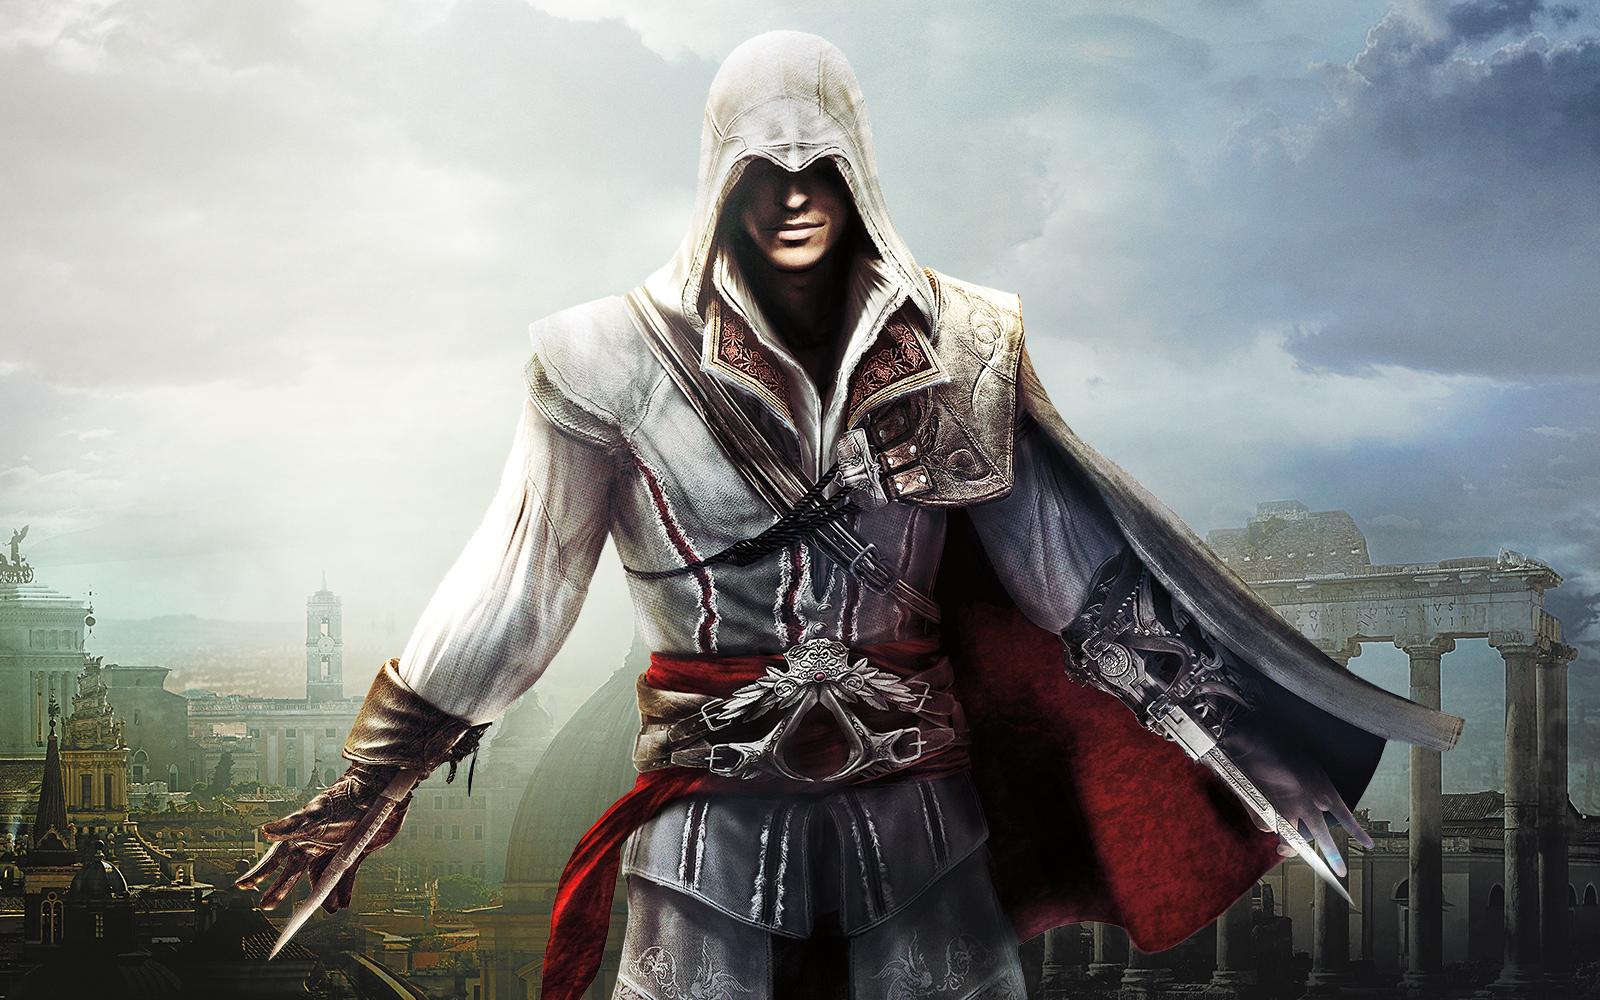 Assassin Creed is one of the most demanding PC game all over the world